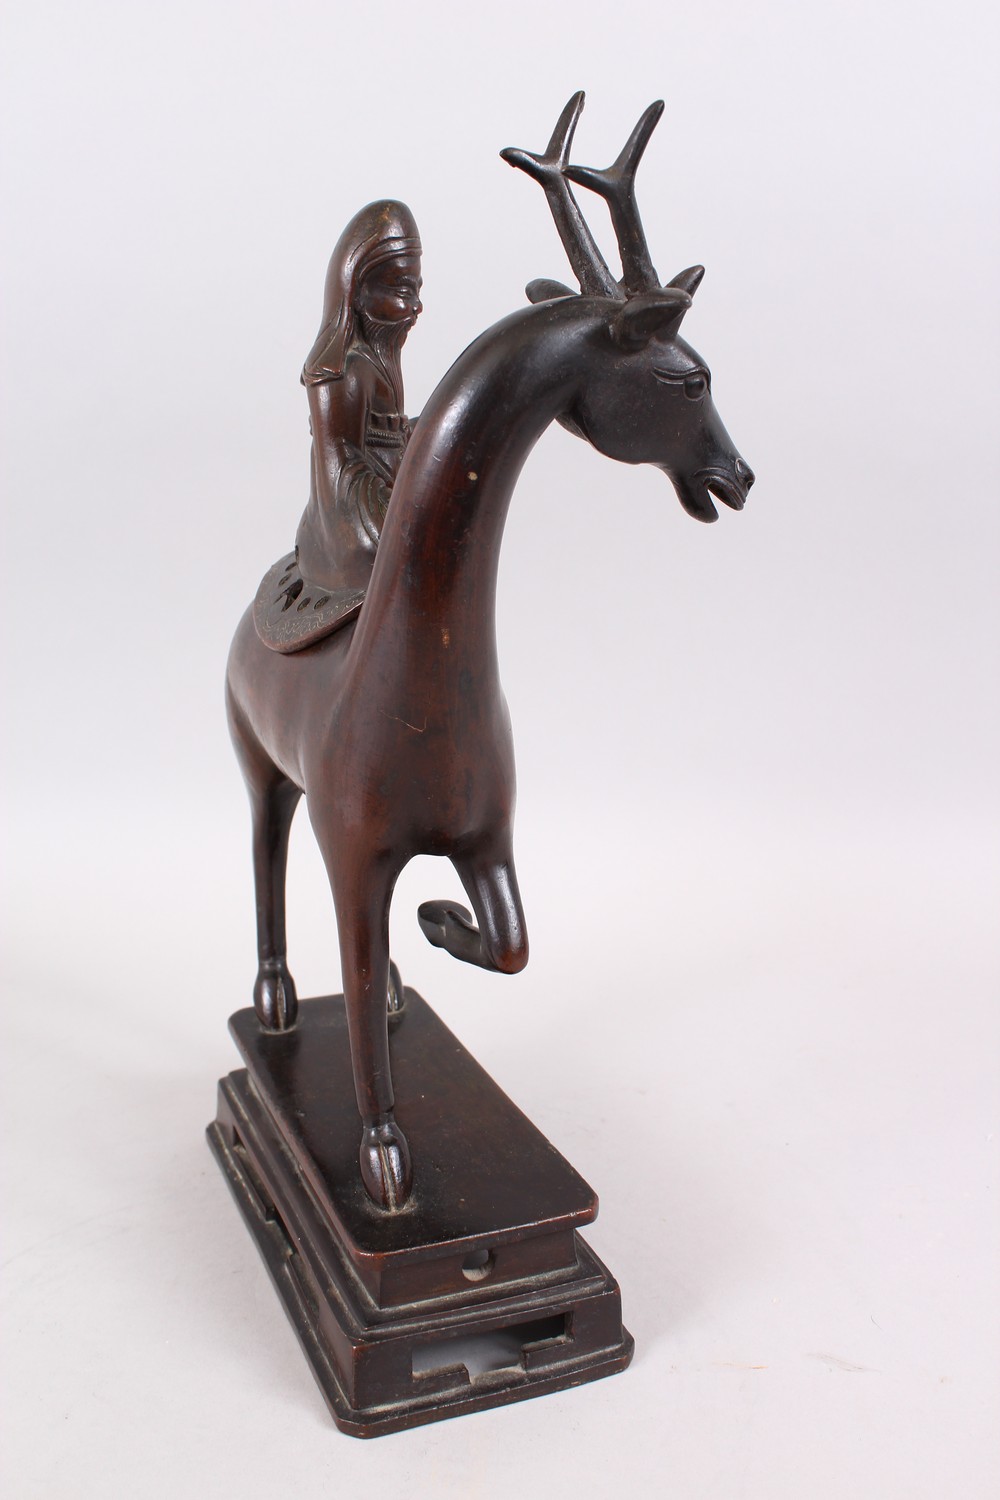 A 19TH CENTURY CHINESE BRONZE CENSER / BURNER OF A DEER, the deer in a gentle pose with one hoof - Image 5 of 7